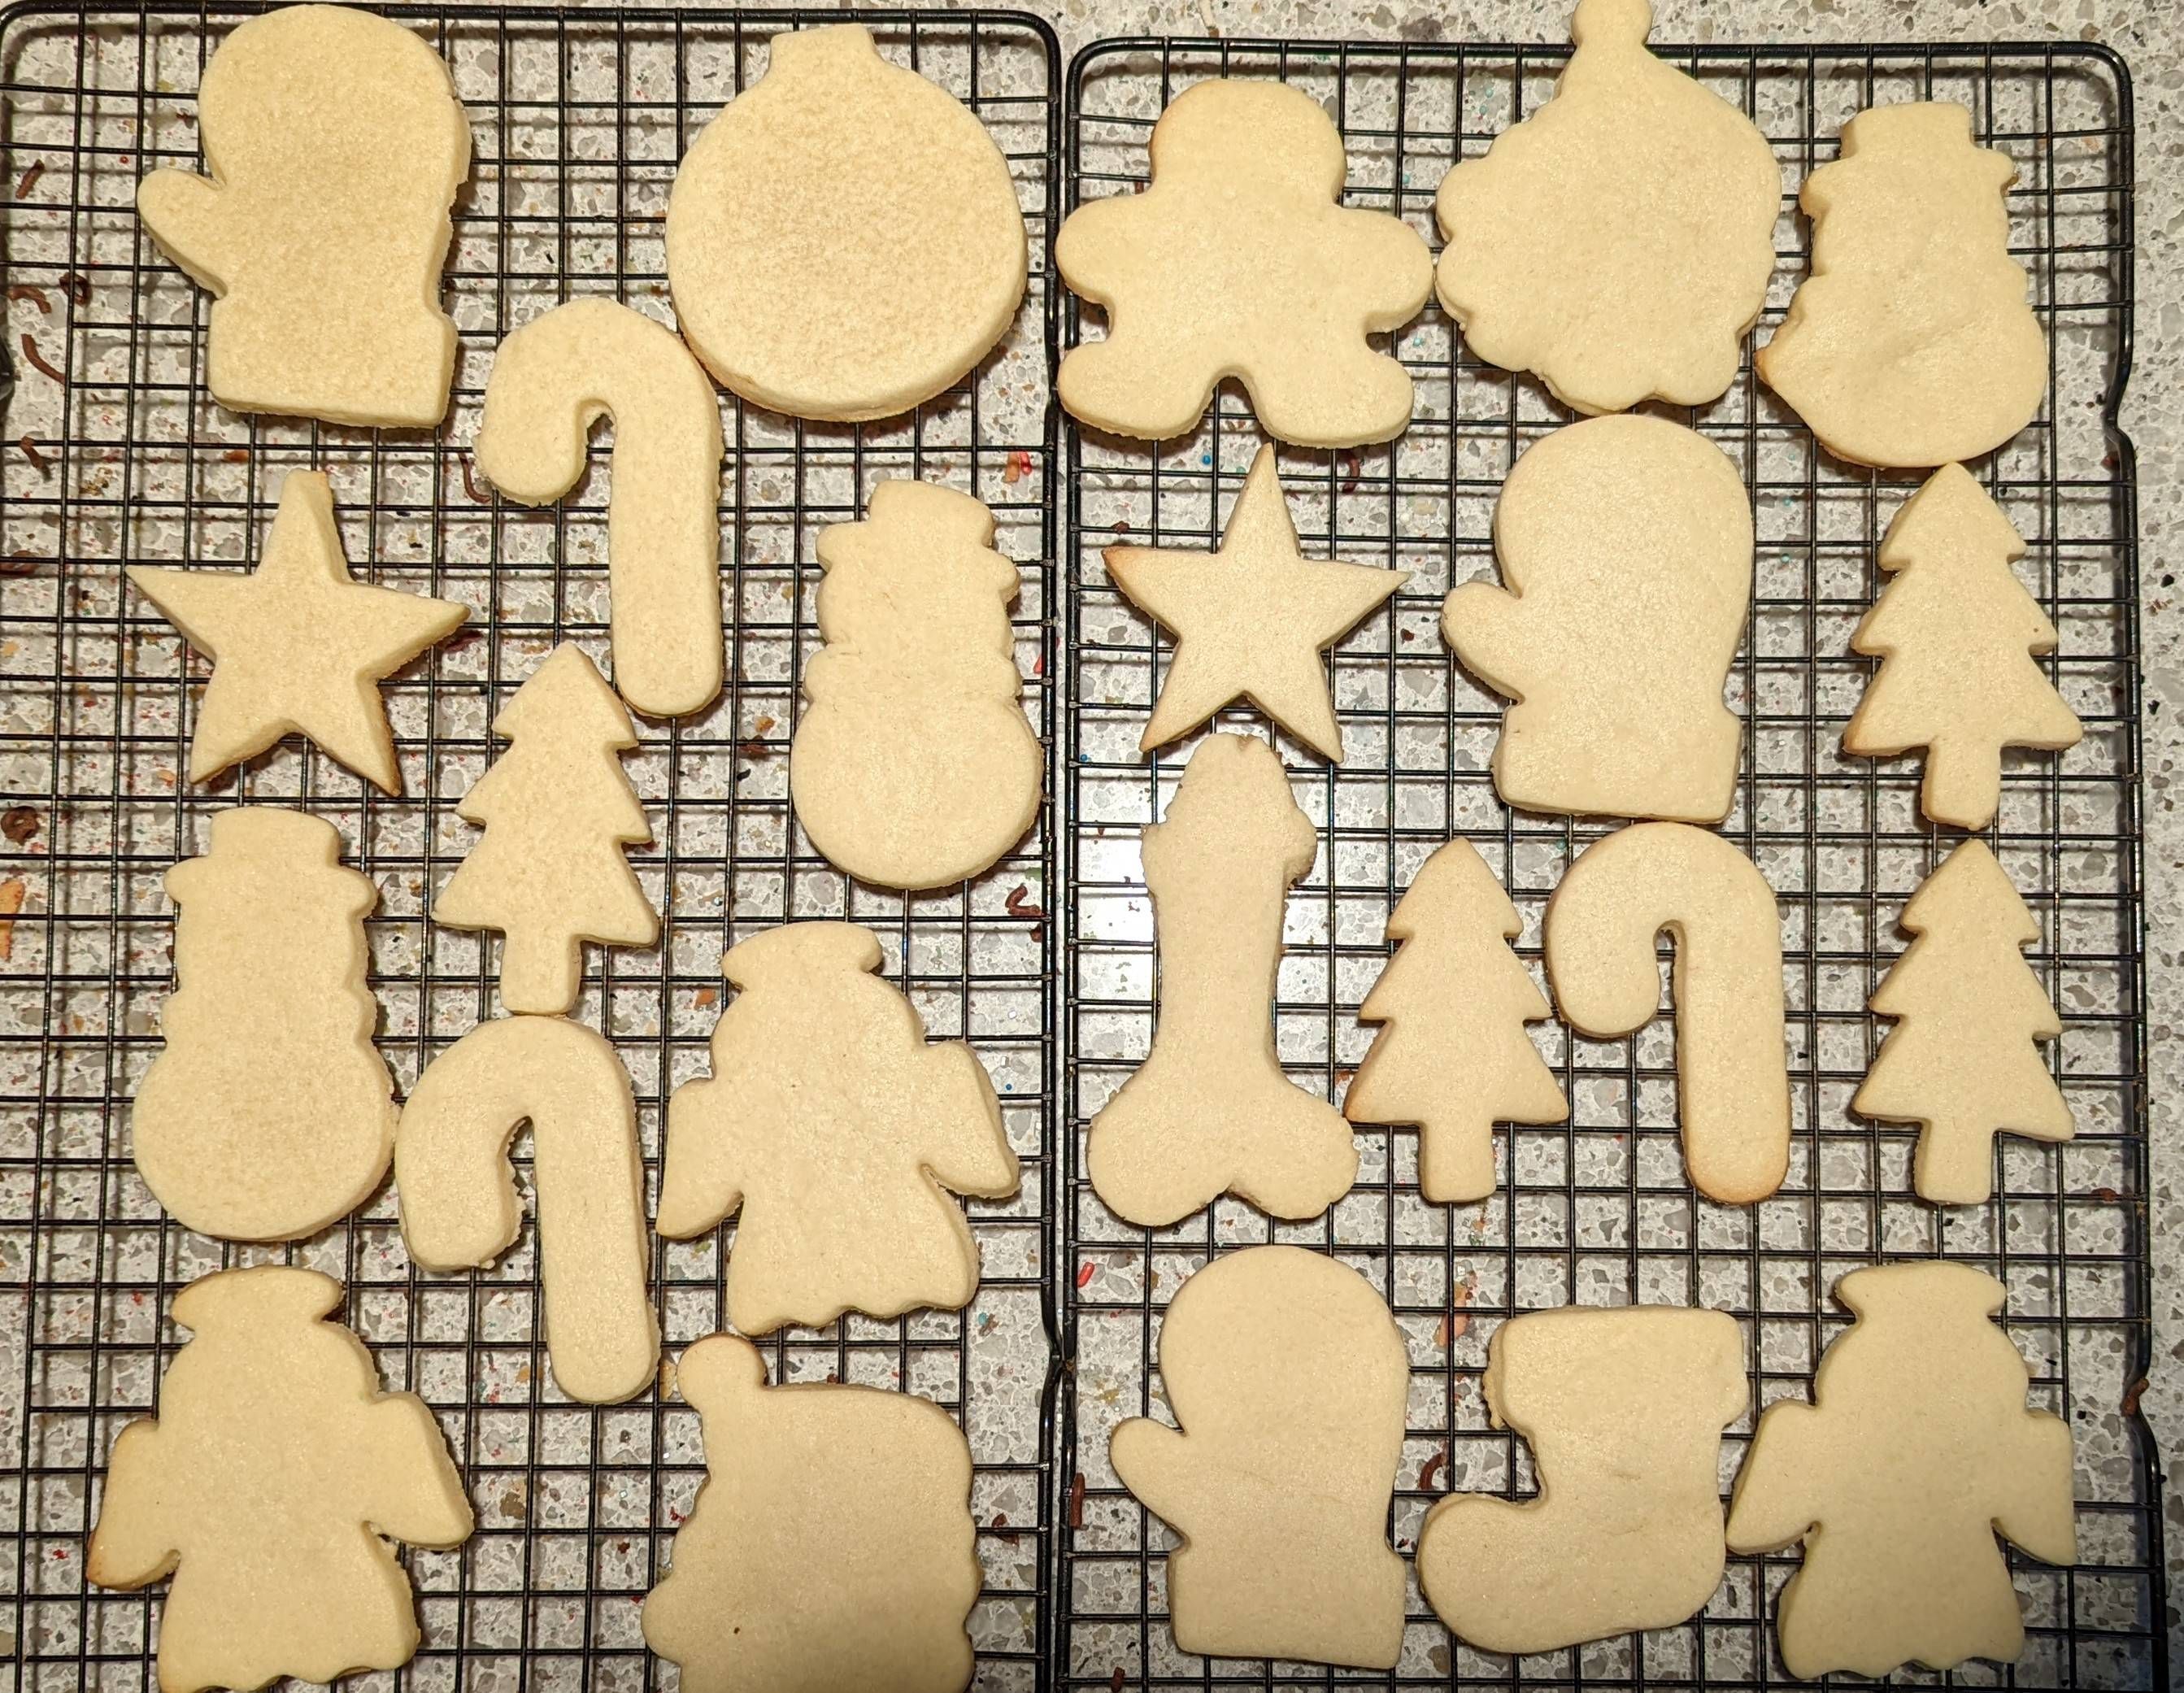 My wife is having a cookie decorating/exchange with a few of her friends. She asked me to bake her some sugar cookies to decorate.